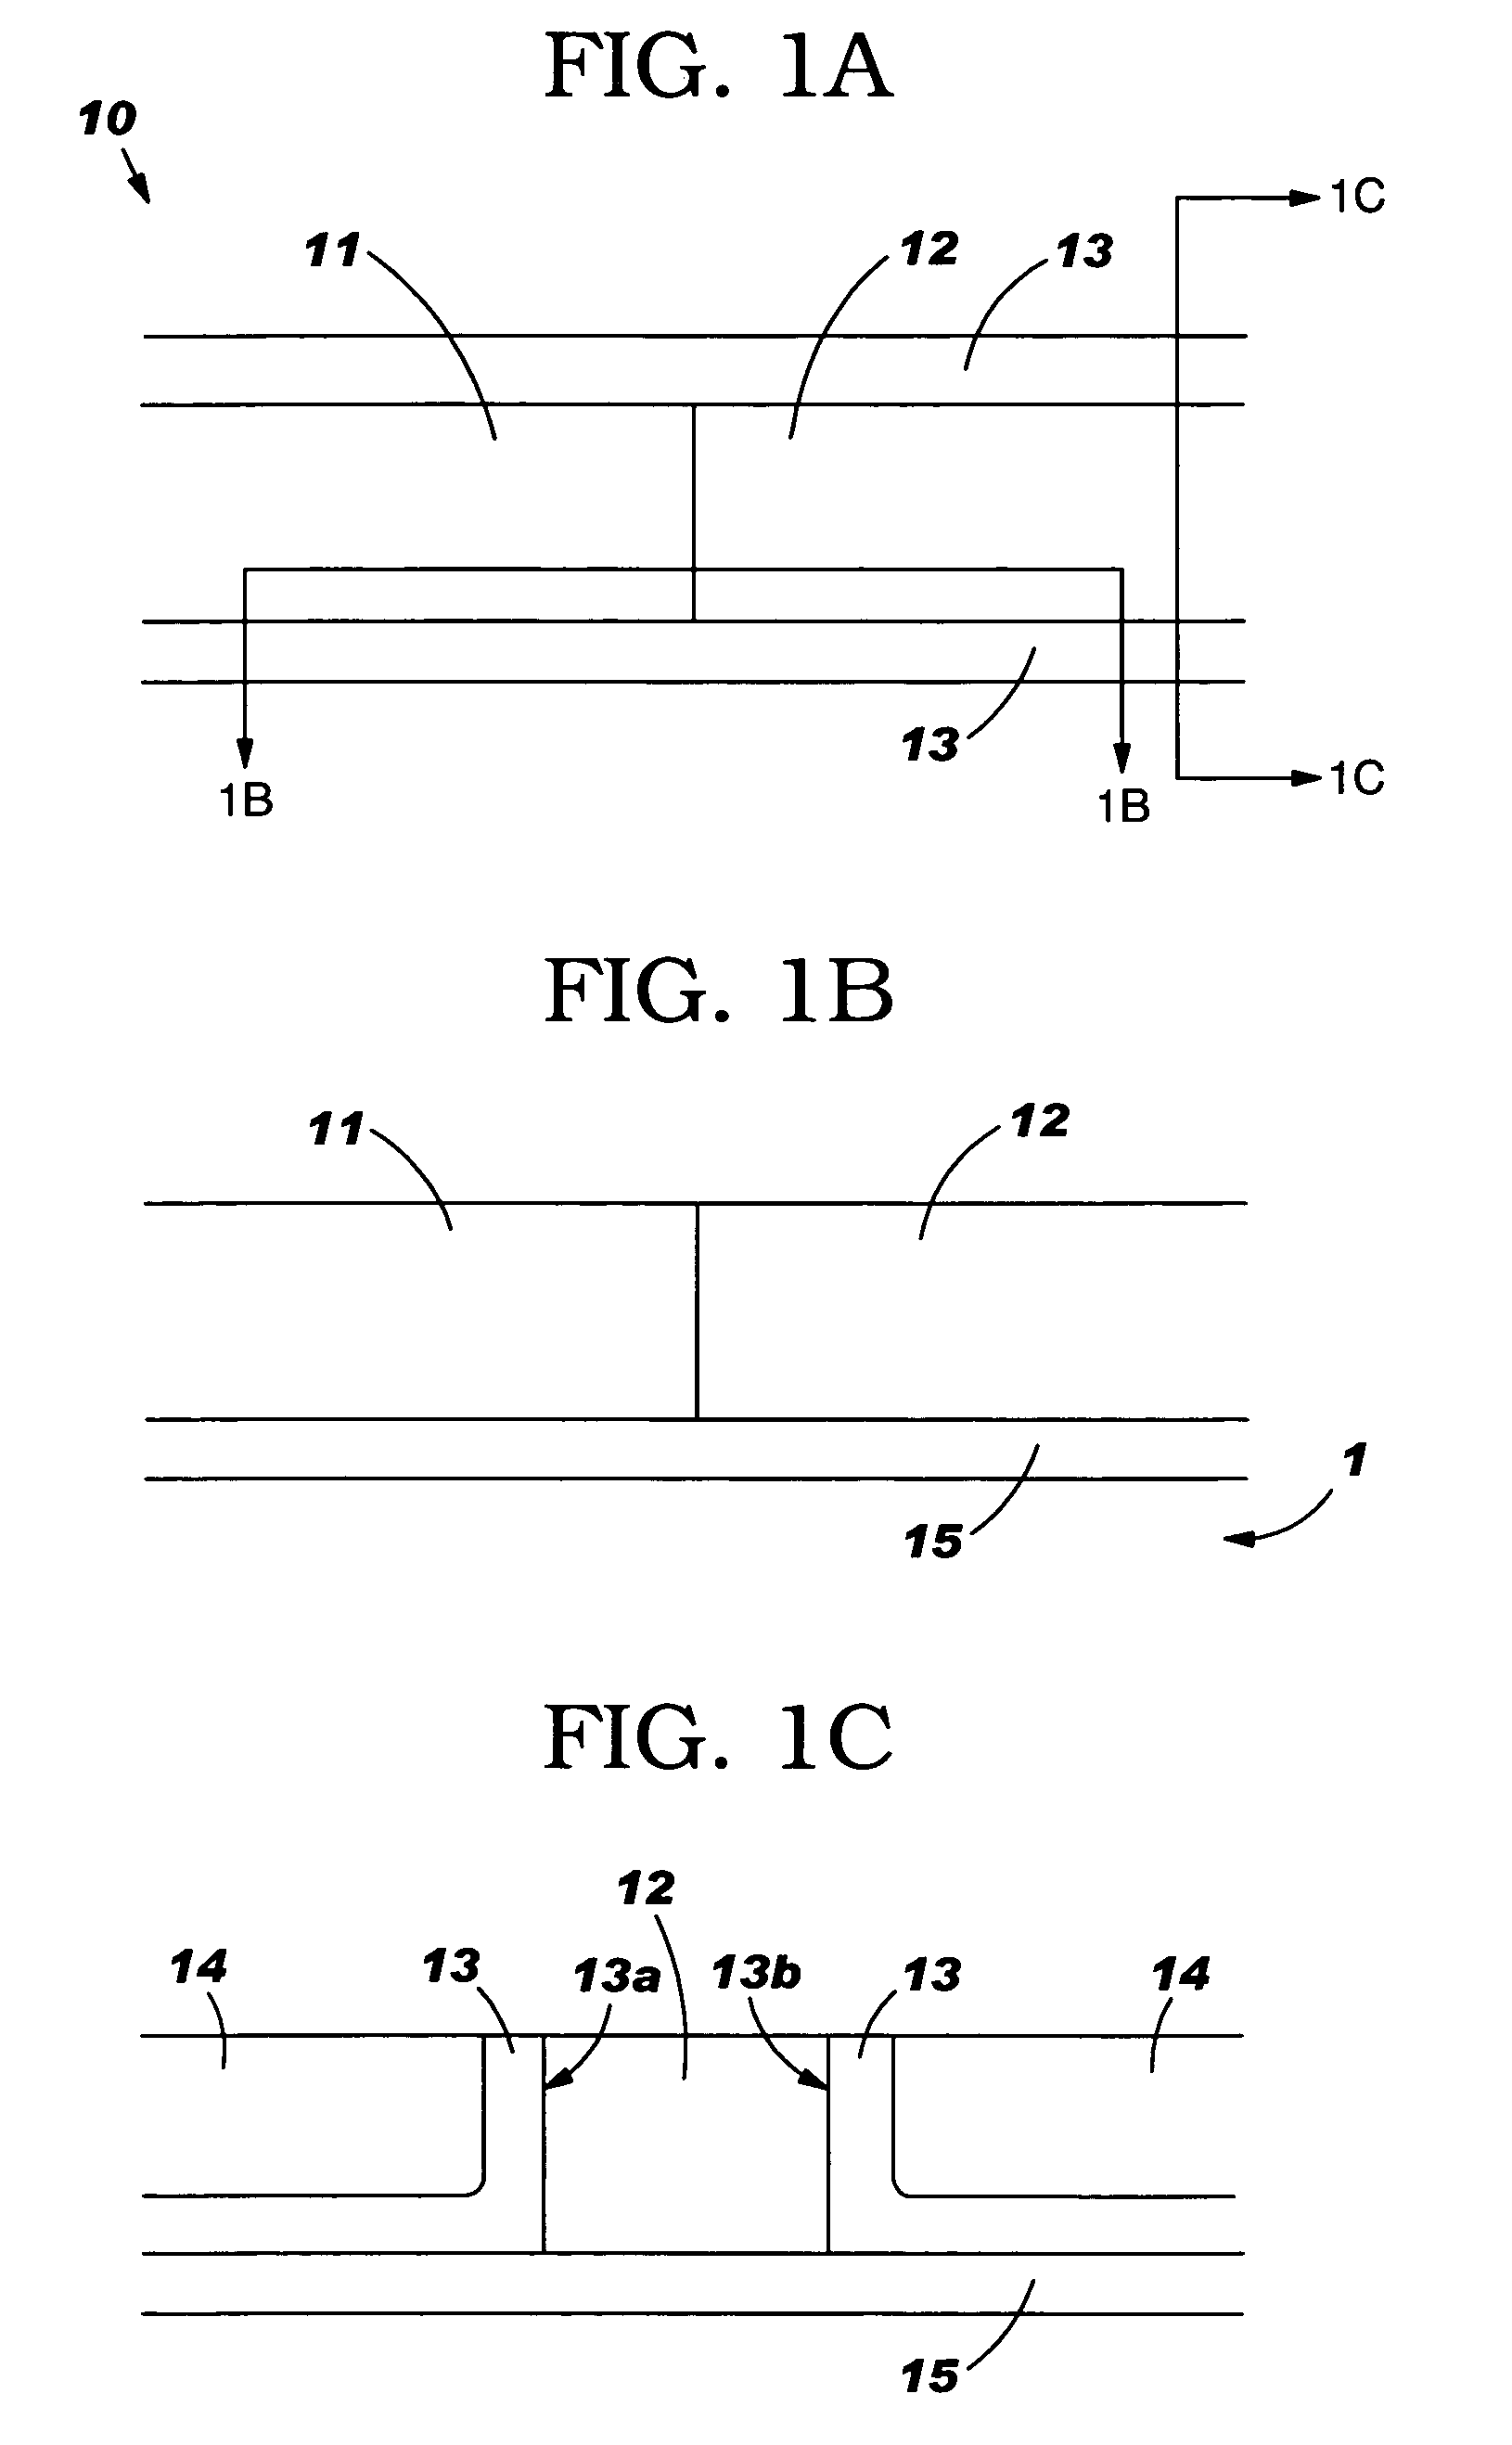 FET gate structure with metal gate electrode and silicide contact